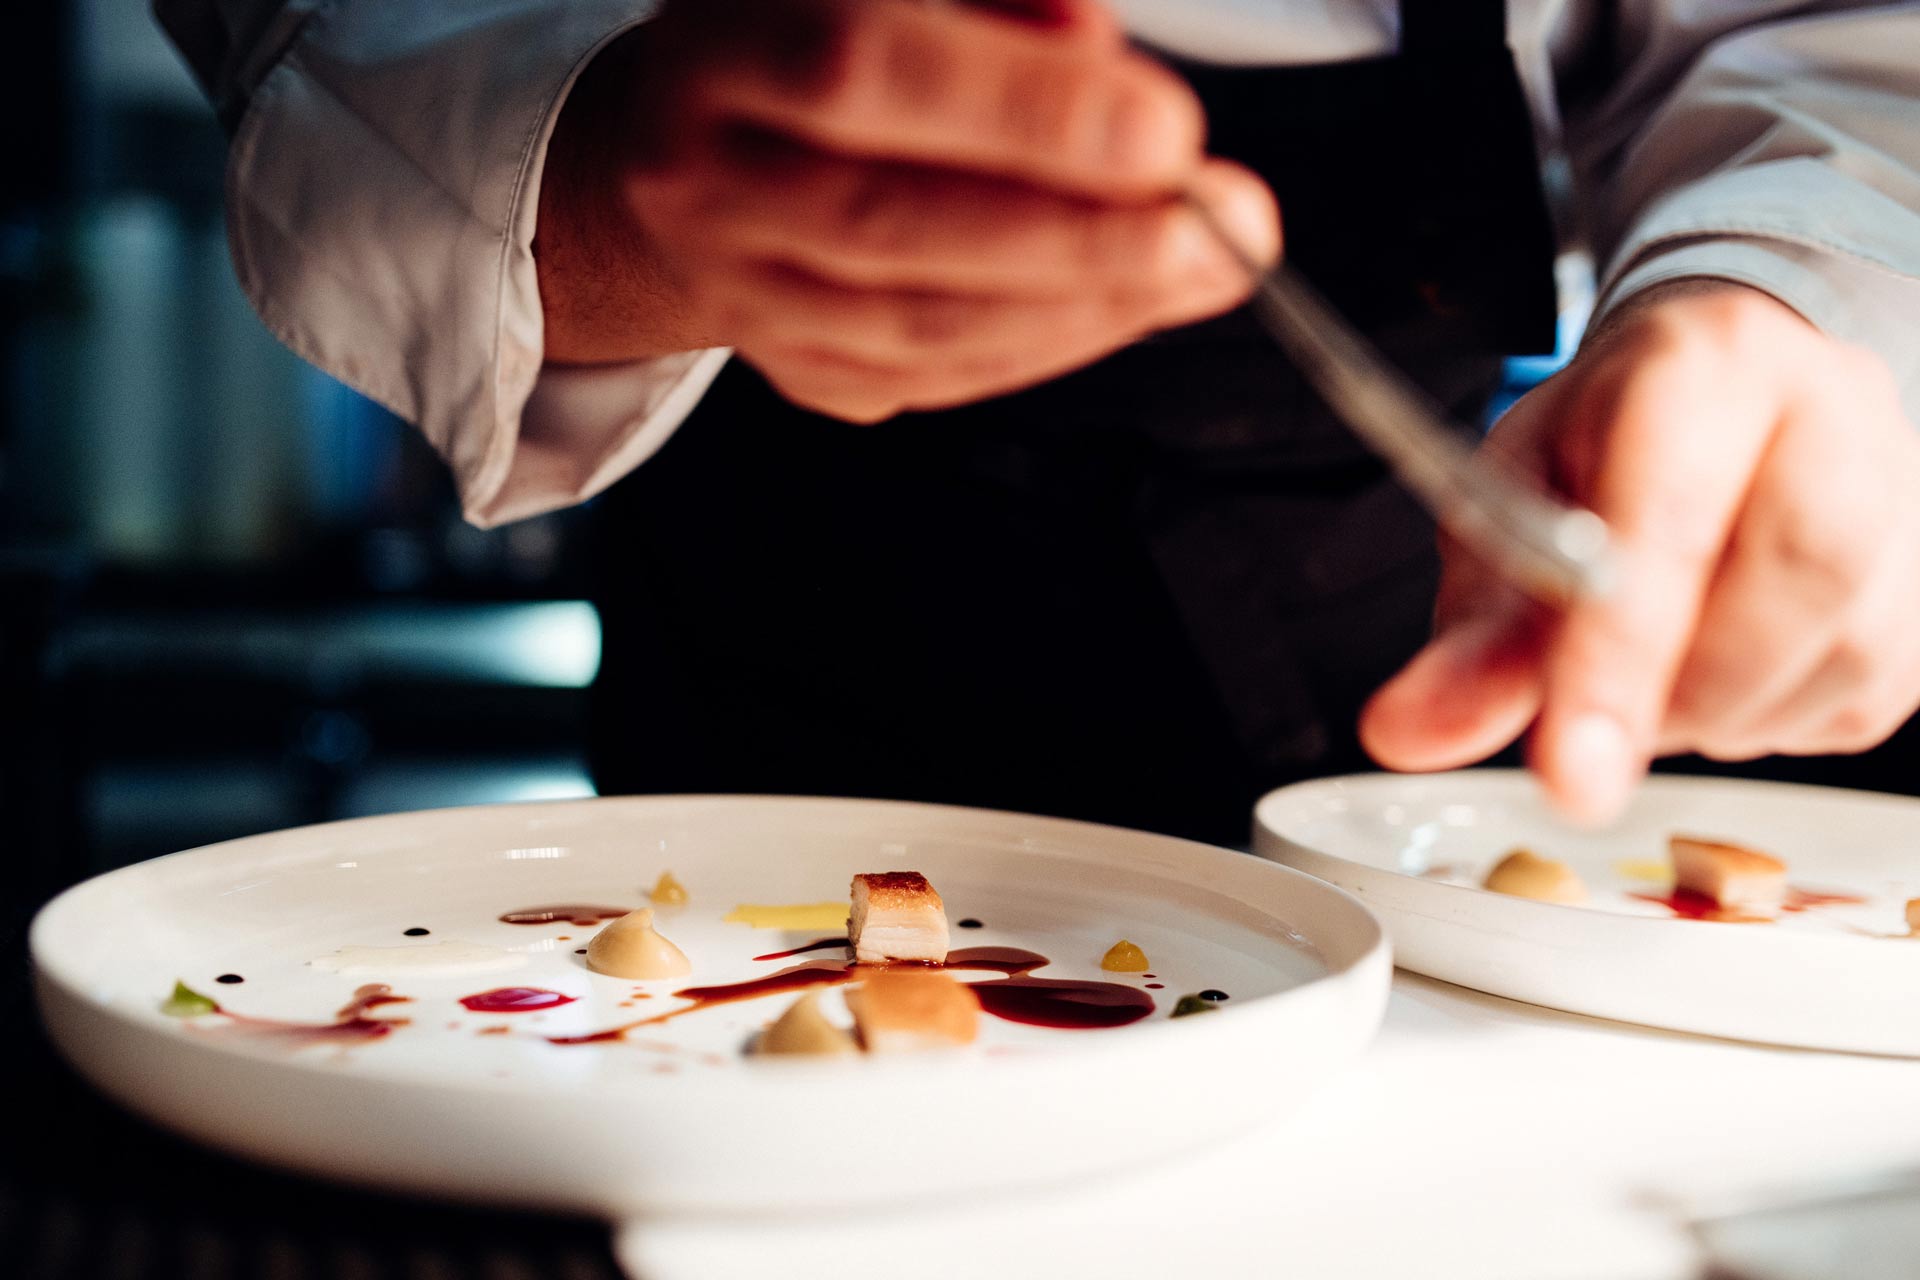 Osteria Francescana Michelin Star Restaurants in Italy For Your Next Trip